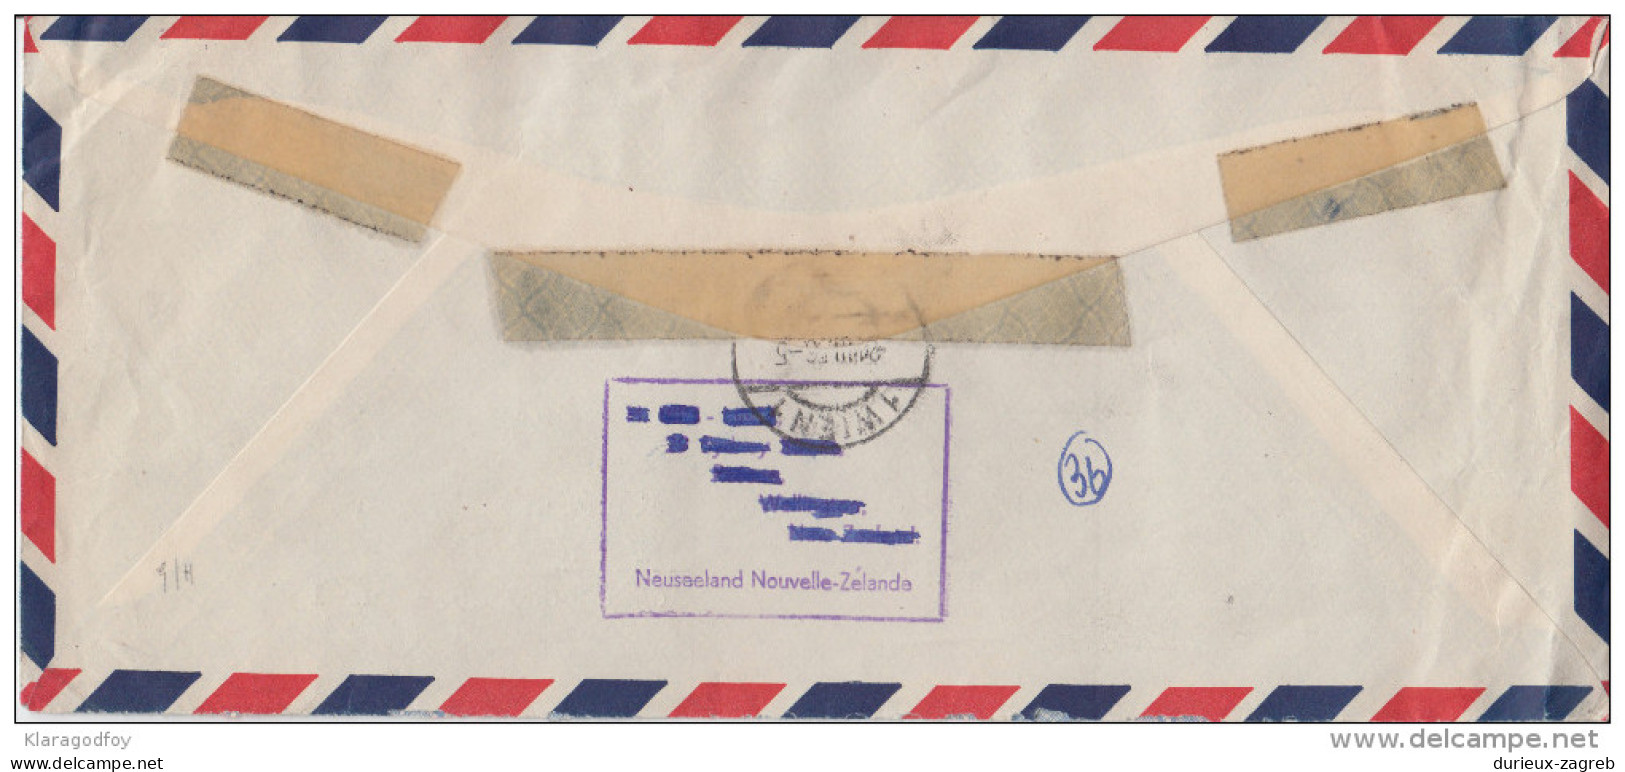 New Zealand Nice Air Mail Letter Cover Travelled To Austria 1956 B160711 - Lettres & Documents